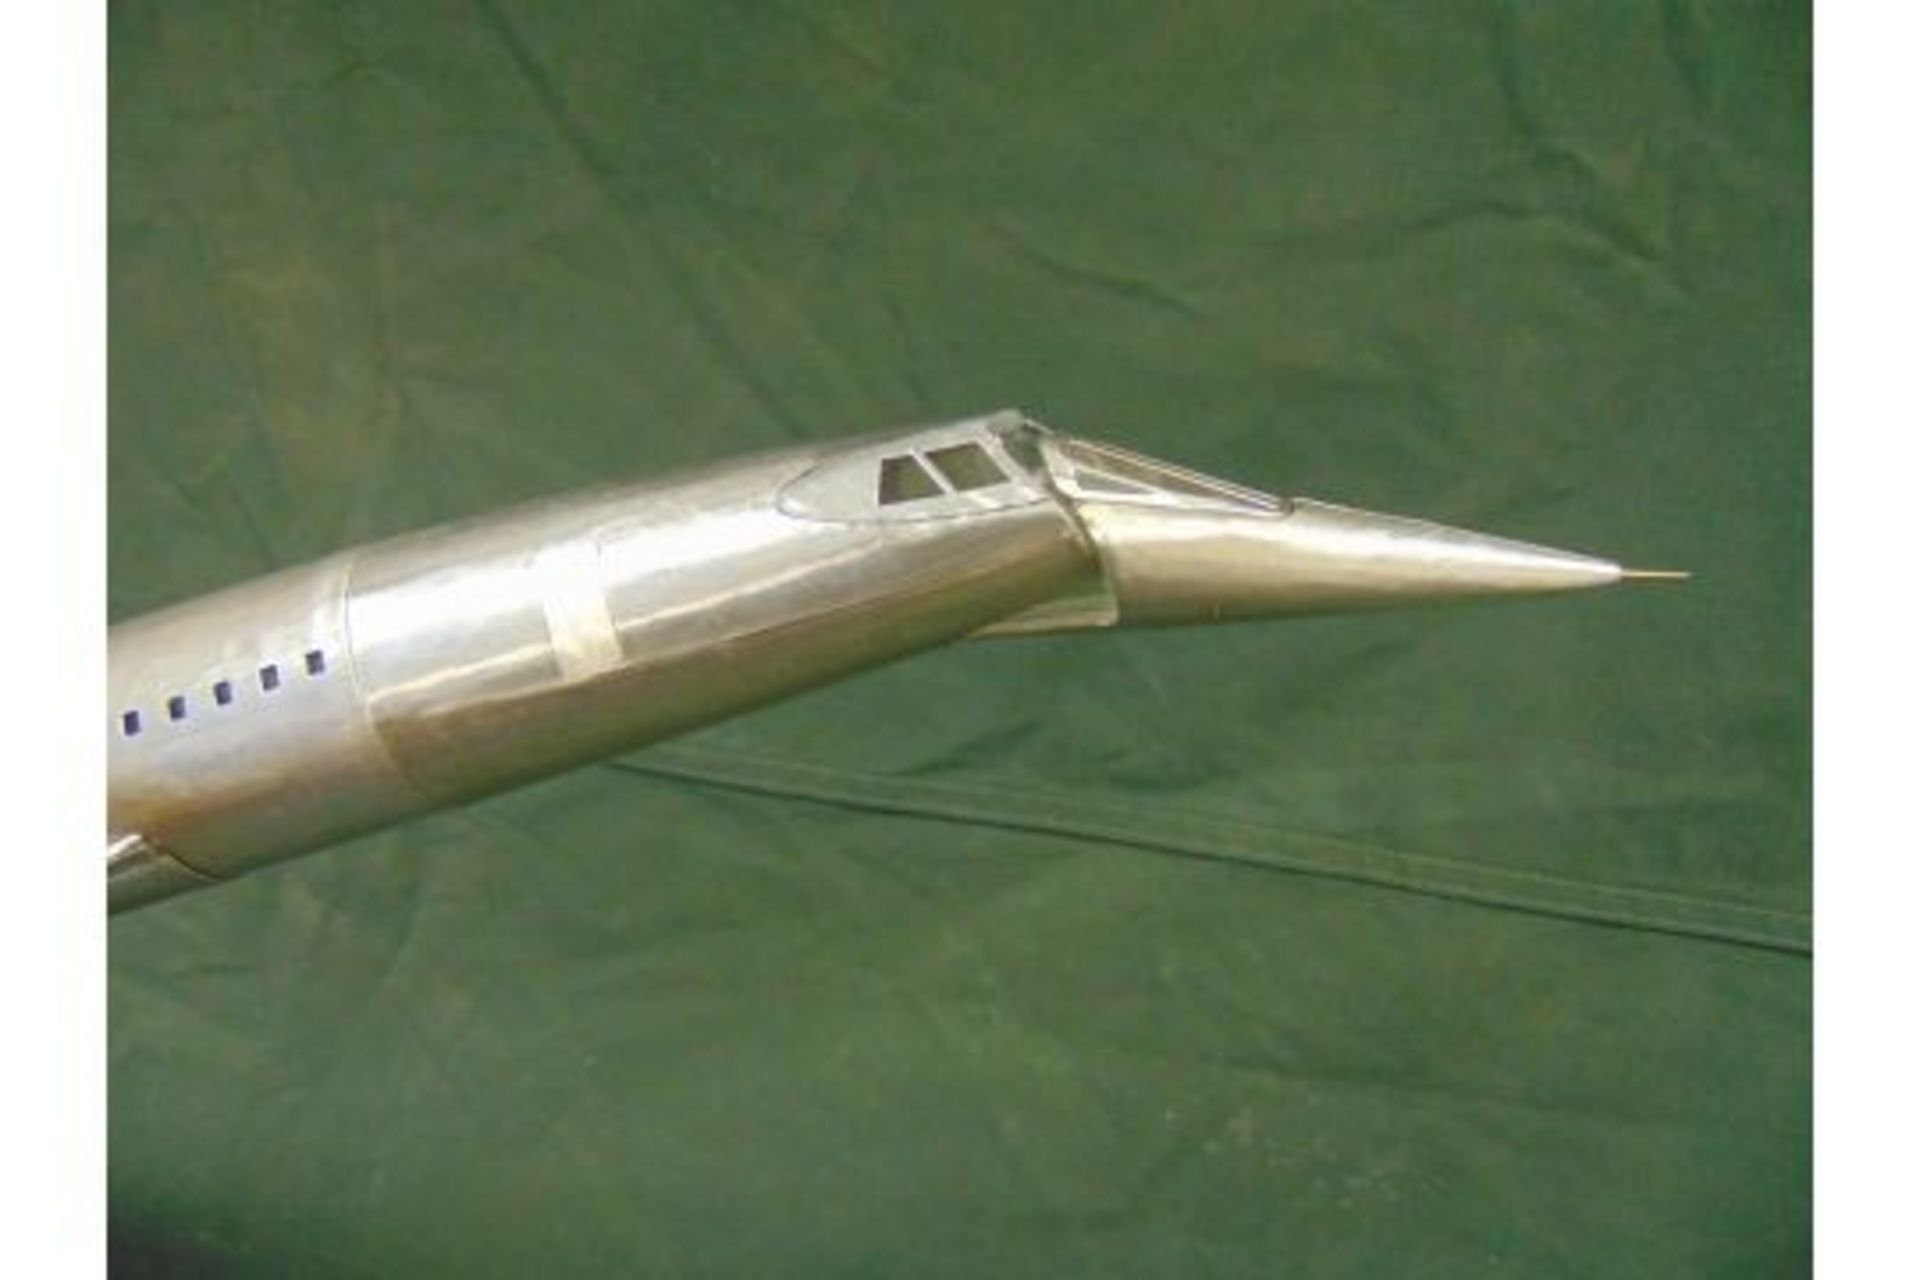 JUST LANDED A BEAUTIFUL!! Large Aluminium CONCORDE Model - Image 7 of 14